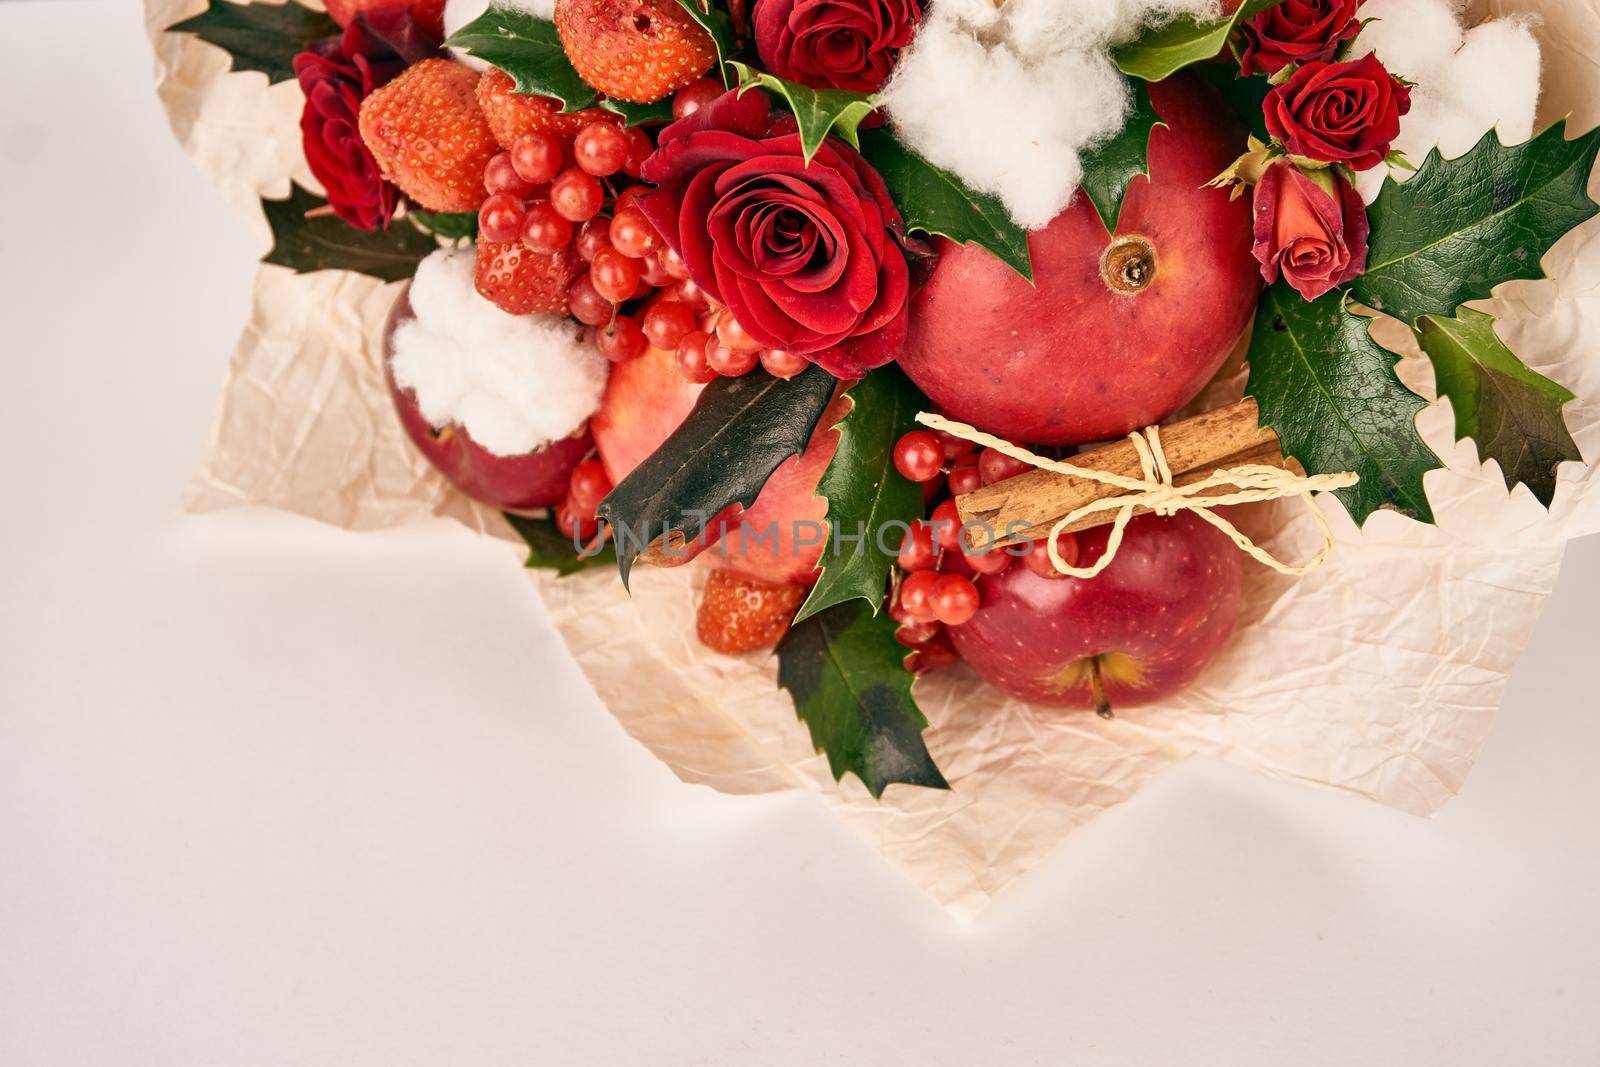 bouquet with red fruits cinnamon decoration gift organic. High quality photo